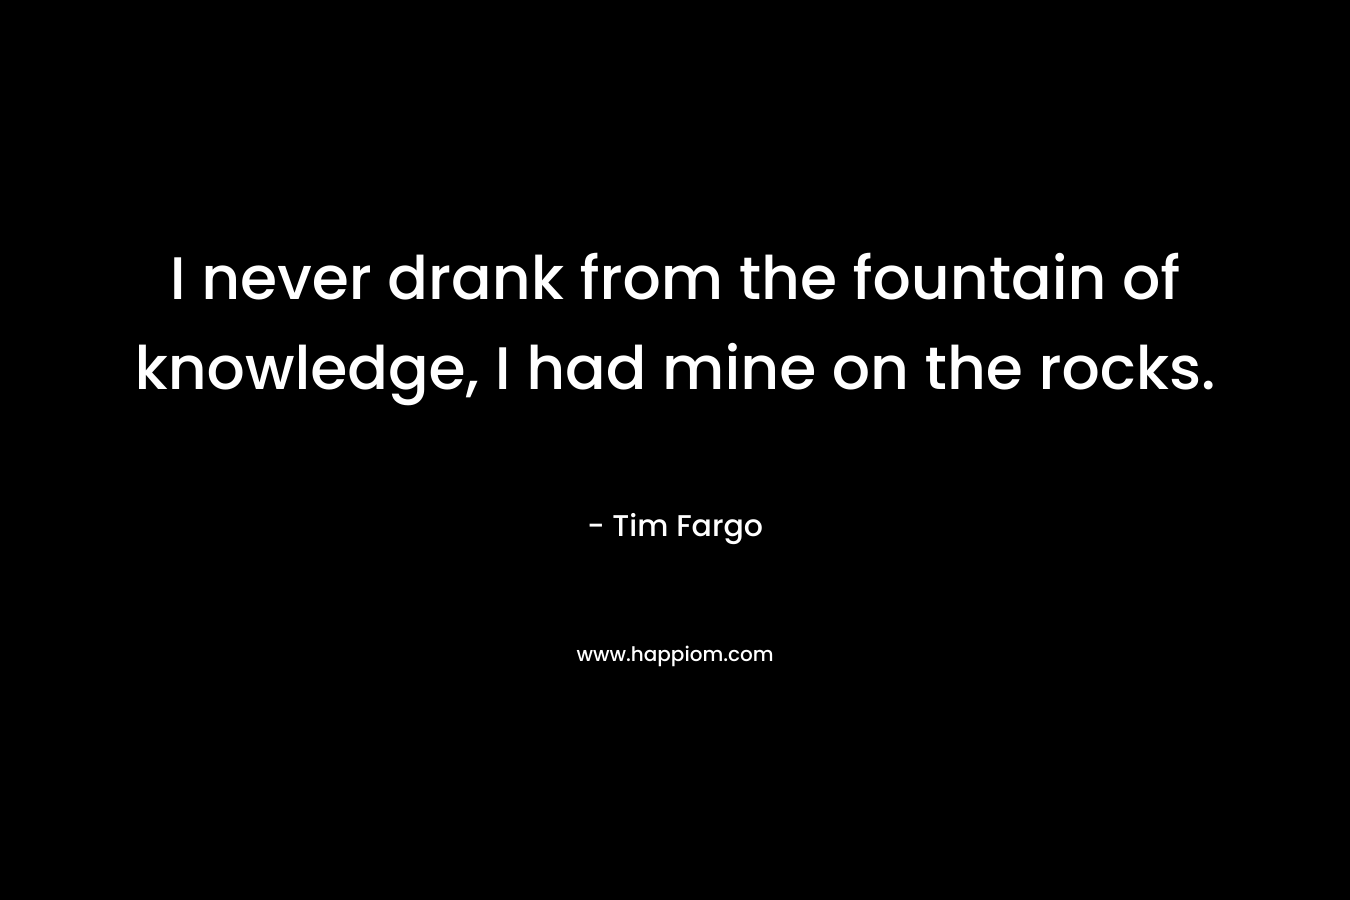 I never drank from the fountain of knowledge, I had mine on the rocks.